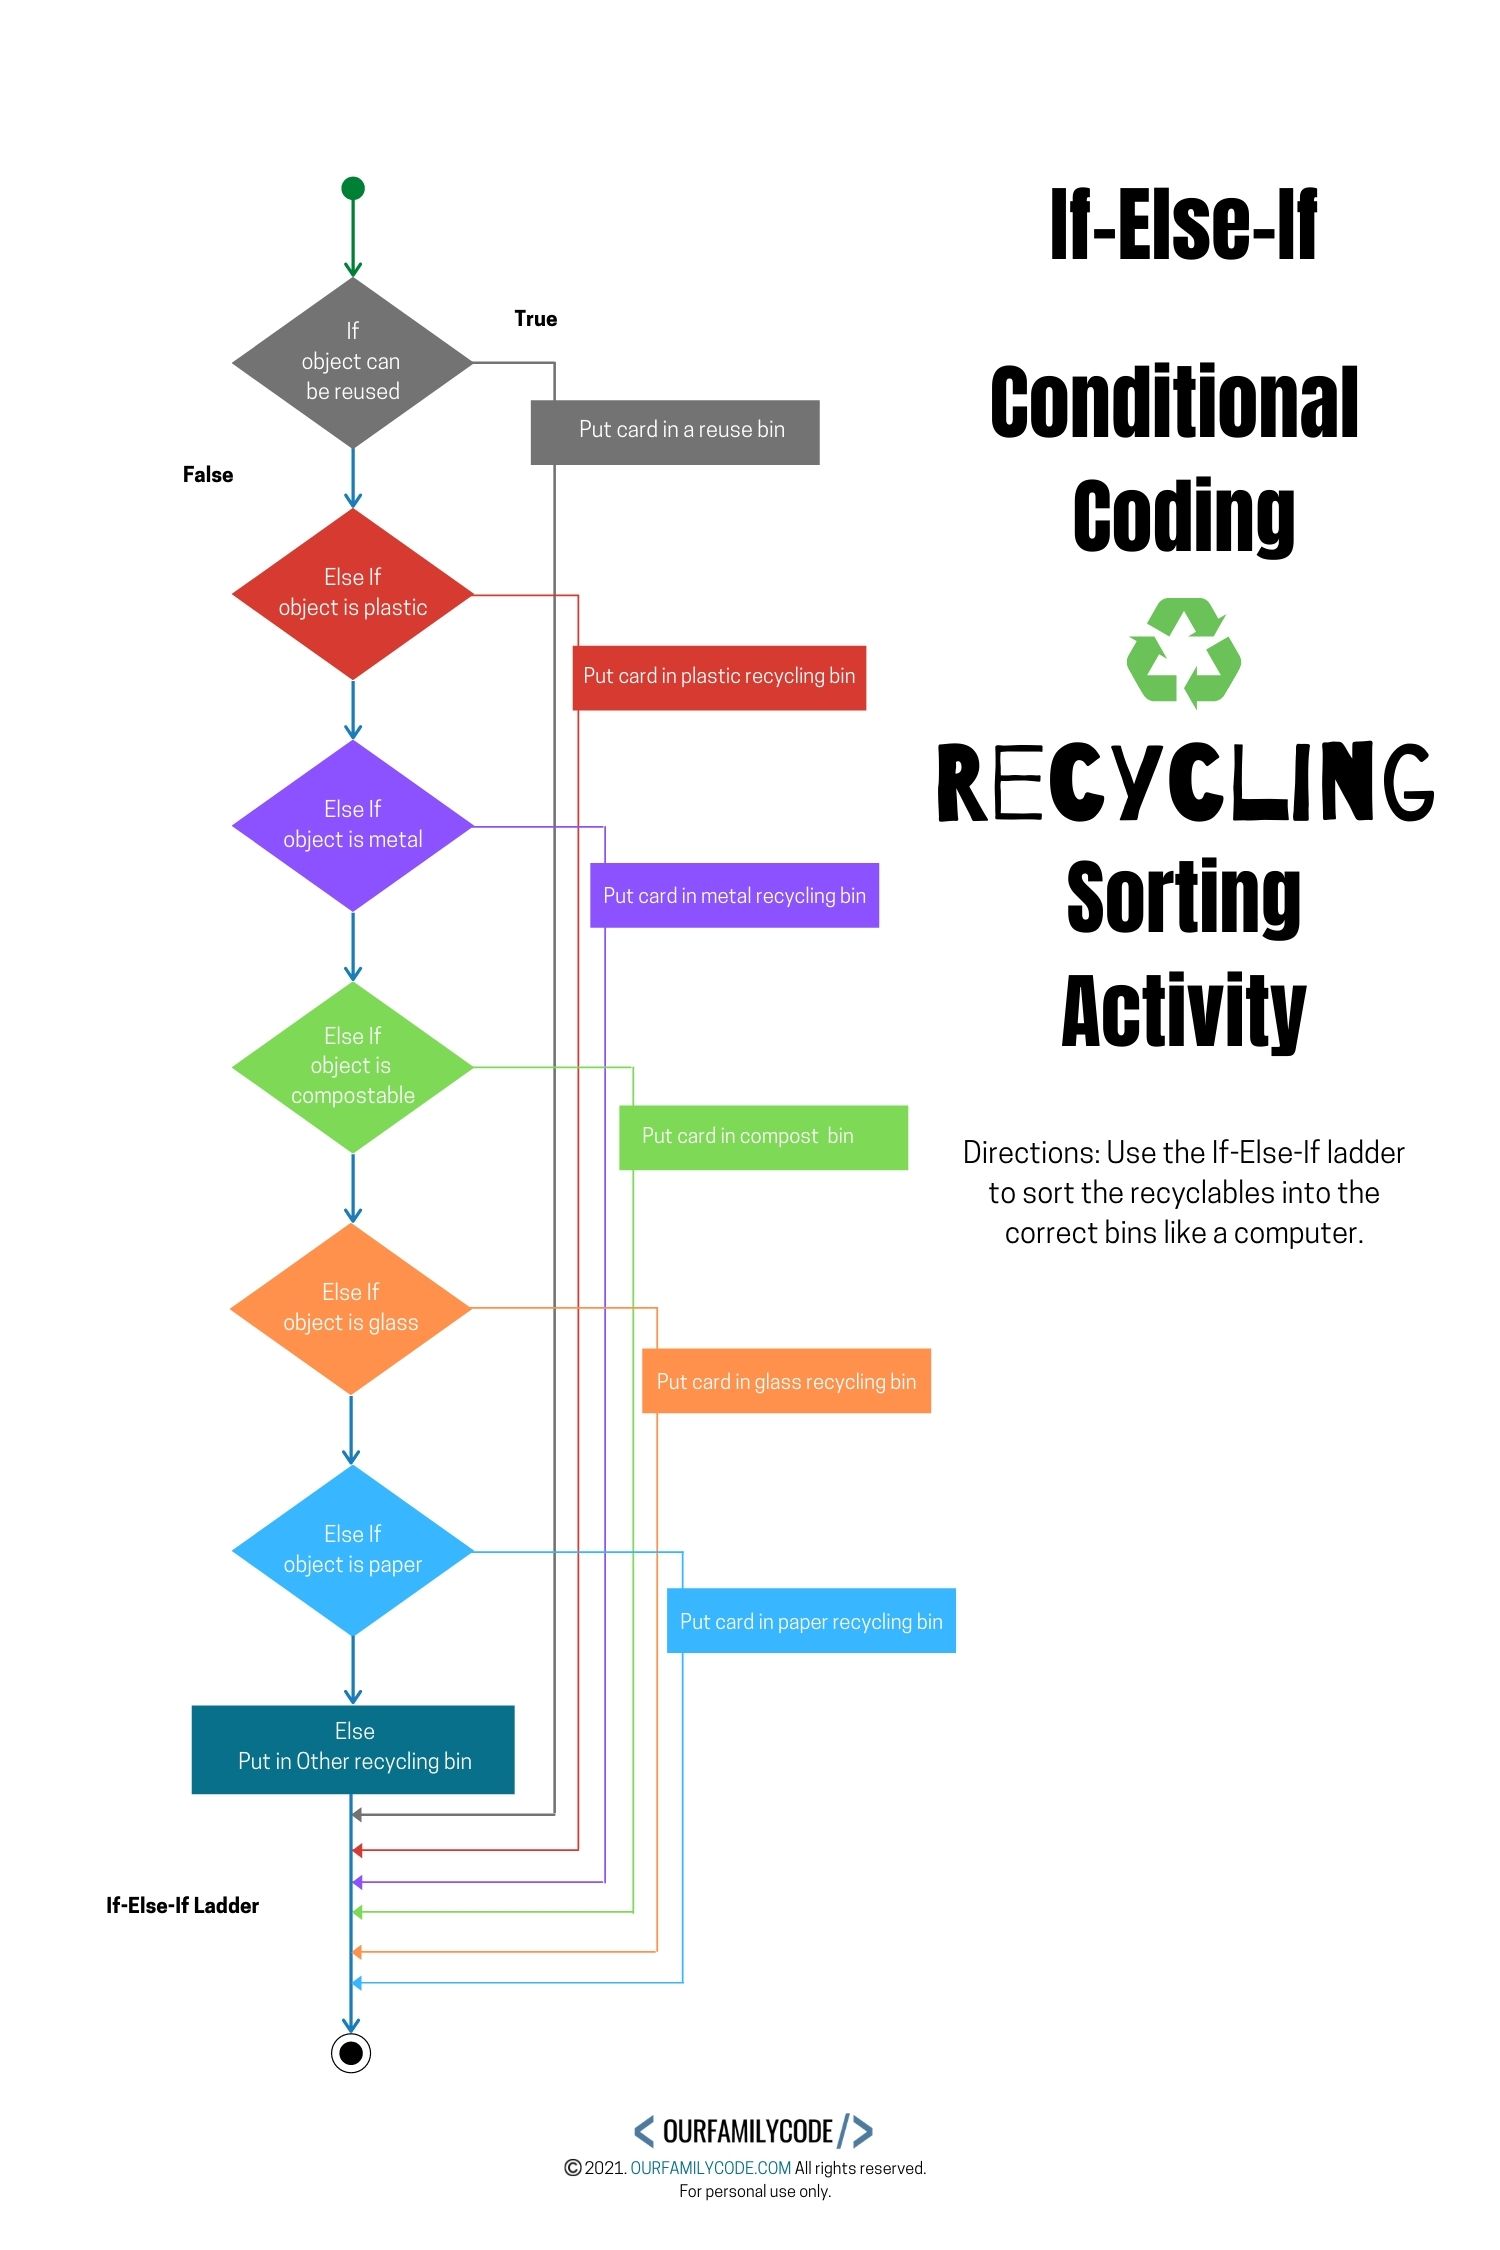 if-else-if conditional coding diagram for recycling sorting activity